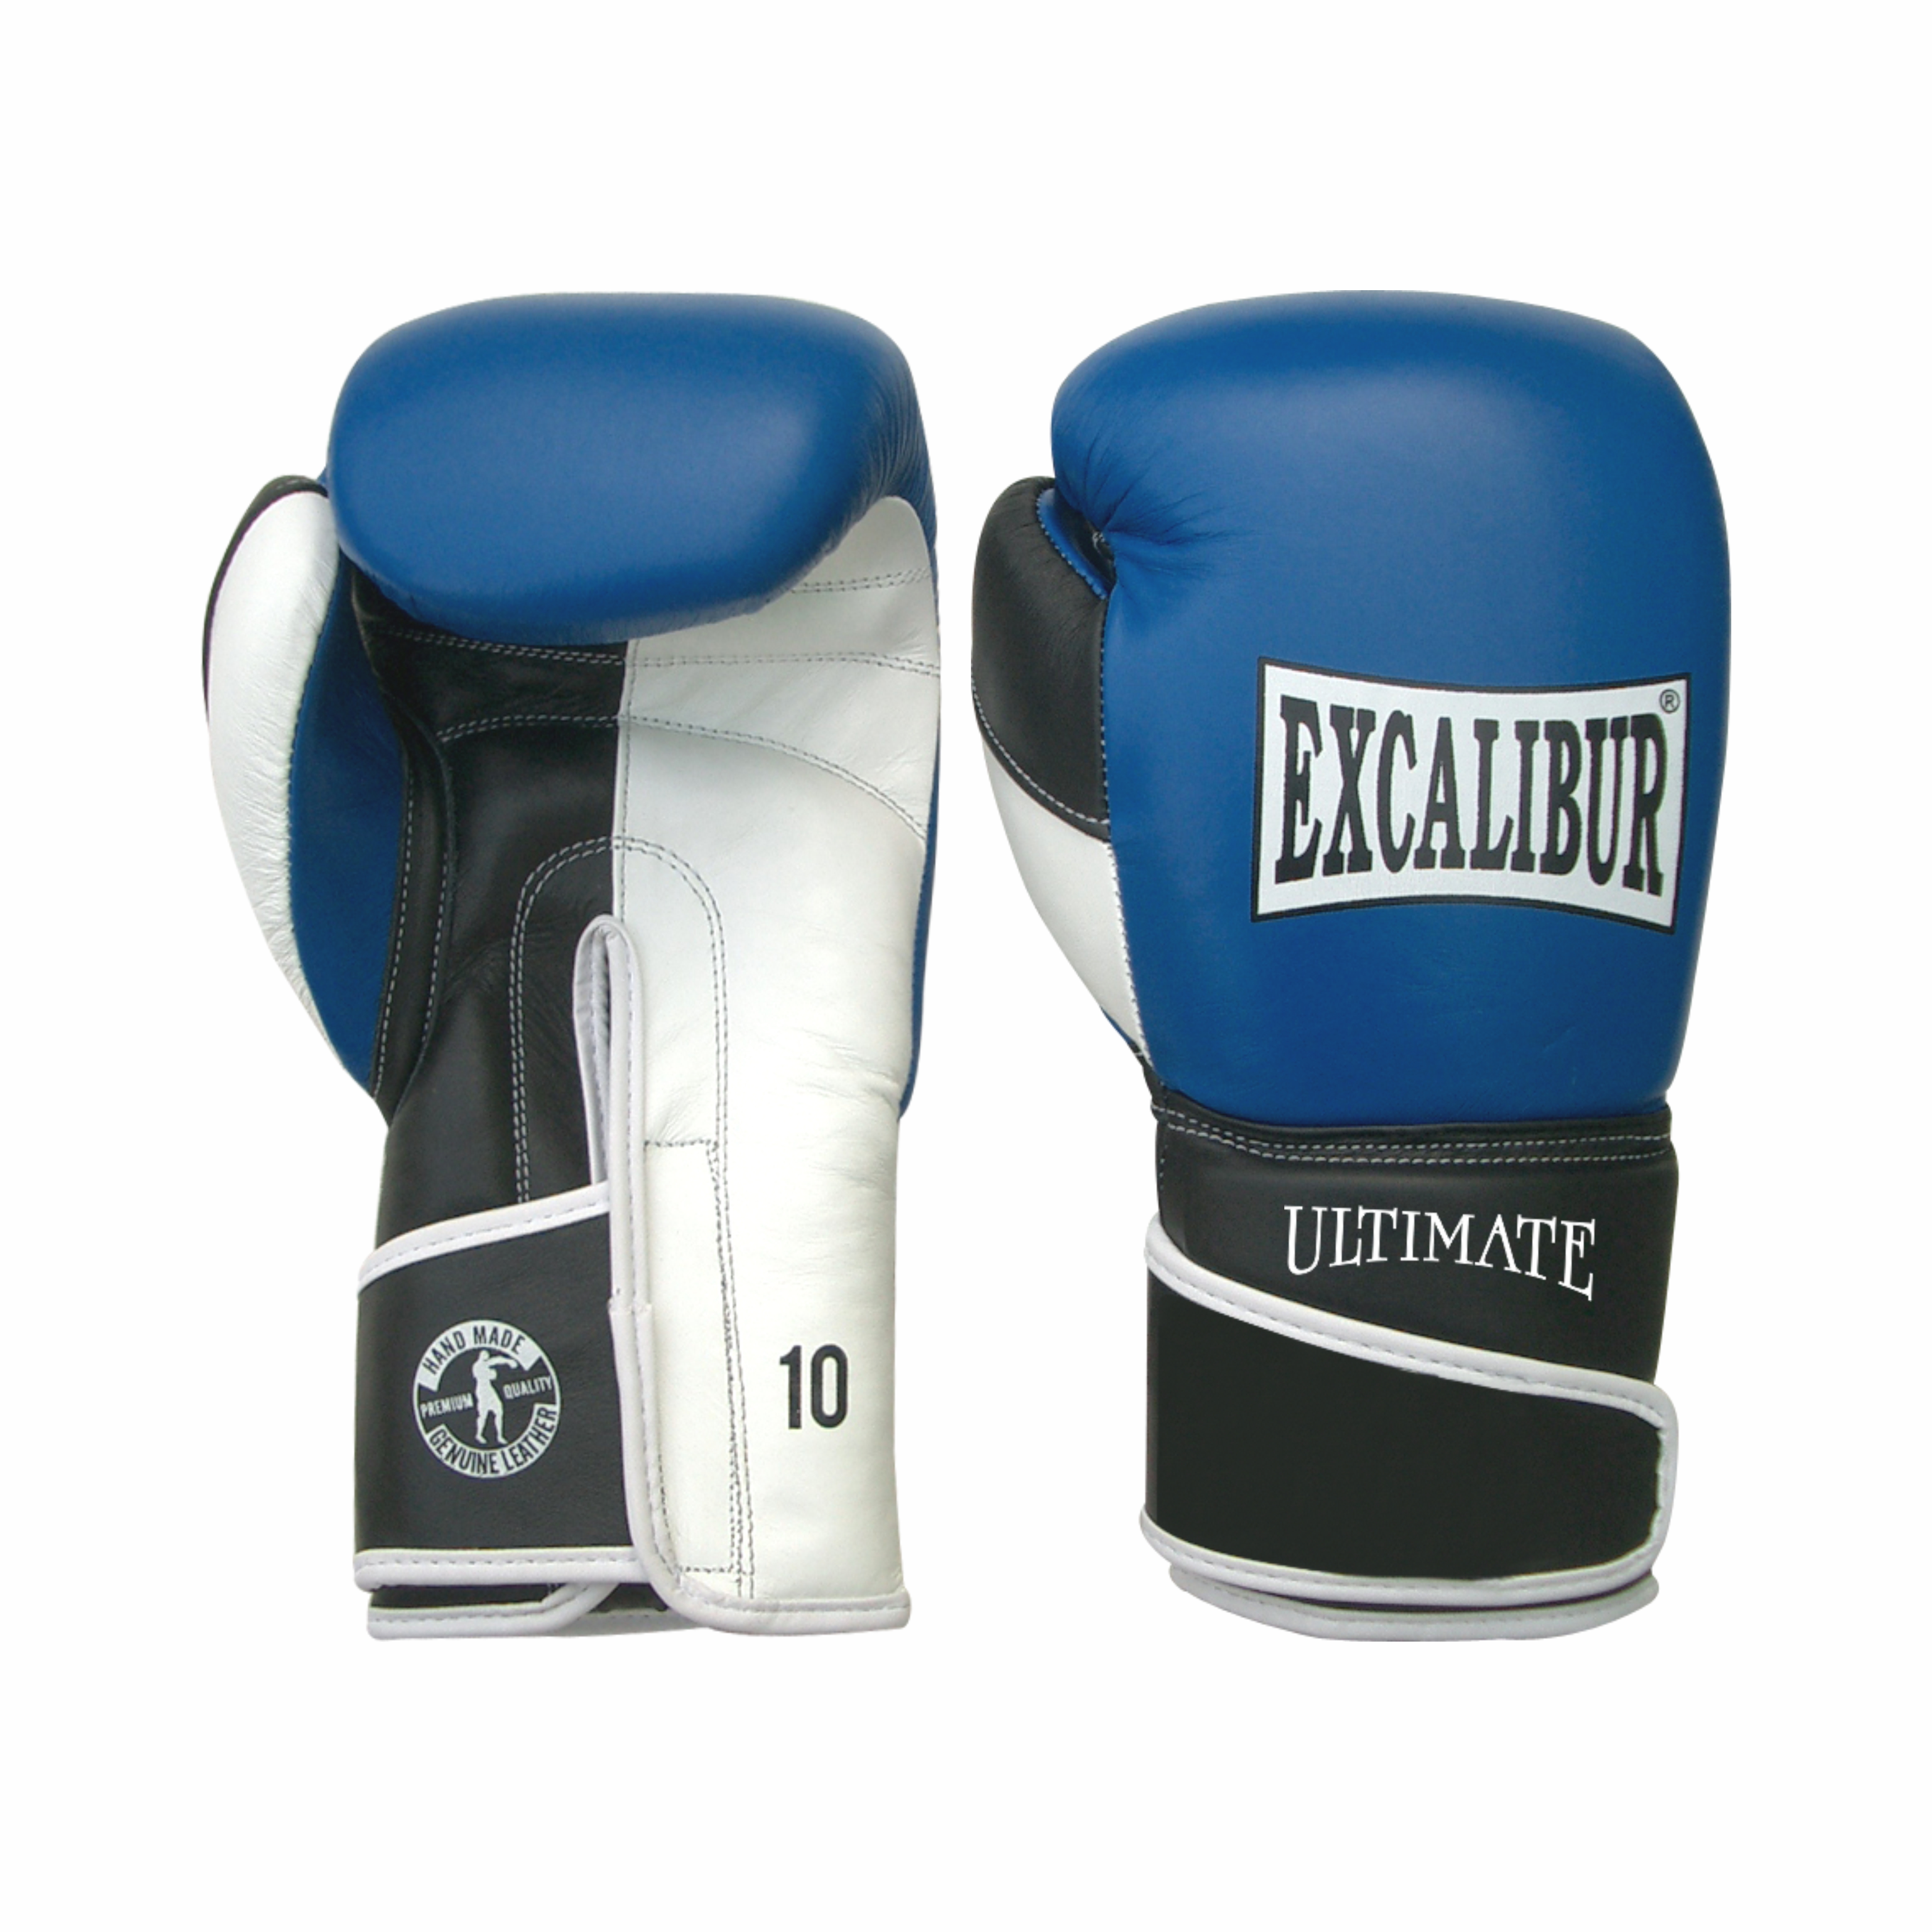 Ultimate Boxing Gloves